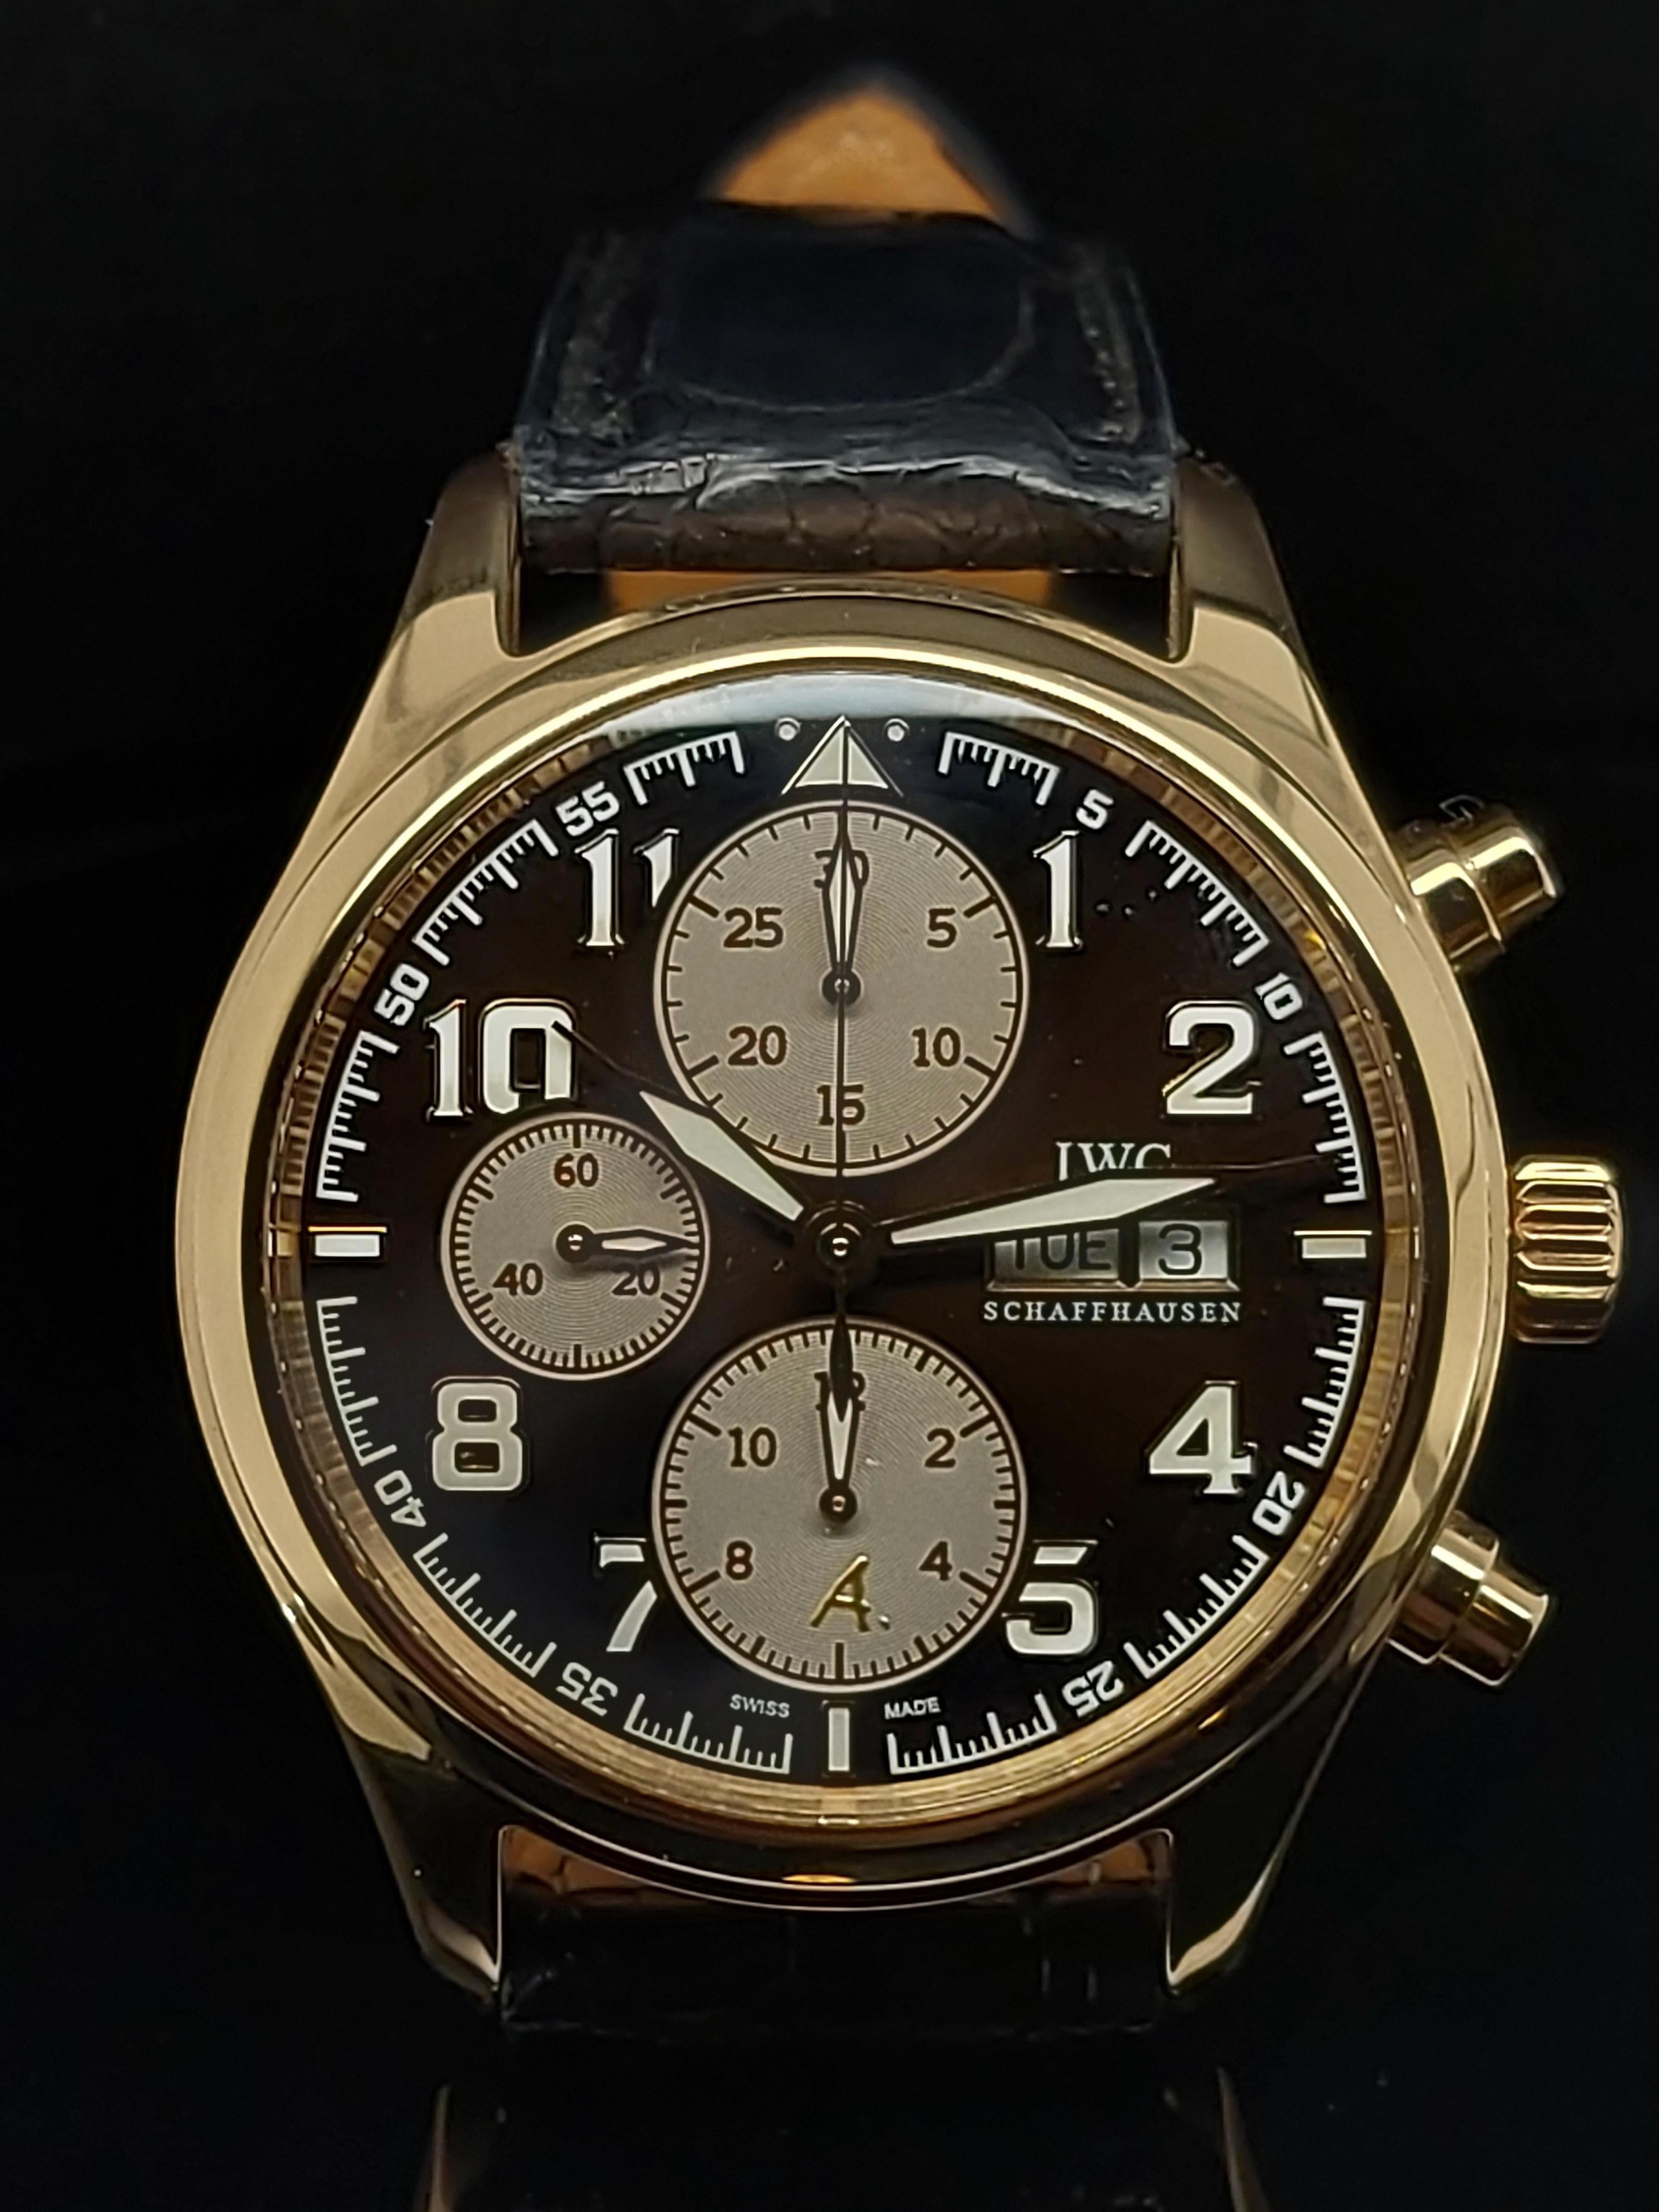 IWC 18k Rose Gold Limited Edition Antoine De Saint Exupery Pilot Chronograph Gents Wristwatch

This is a SOLD OUT  limited edition piece of only 250 manufactured and sold worldwide, to celebrate author and pilot Antoine de Saint Exupery, for his